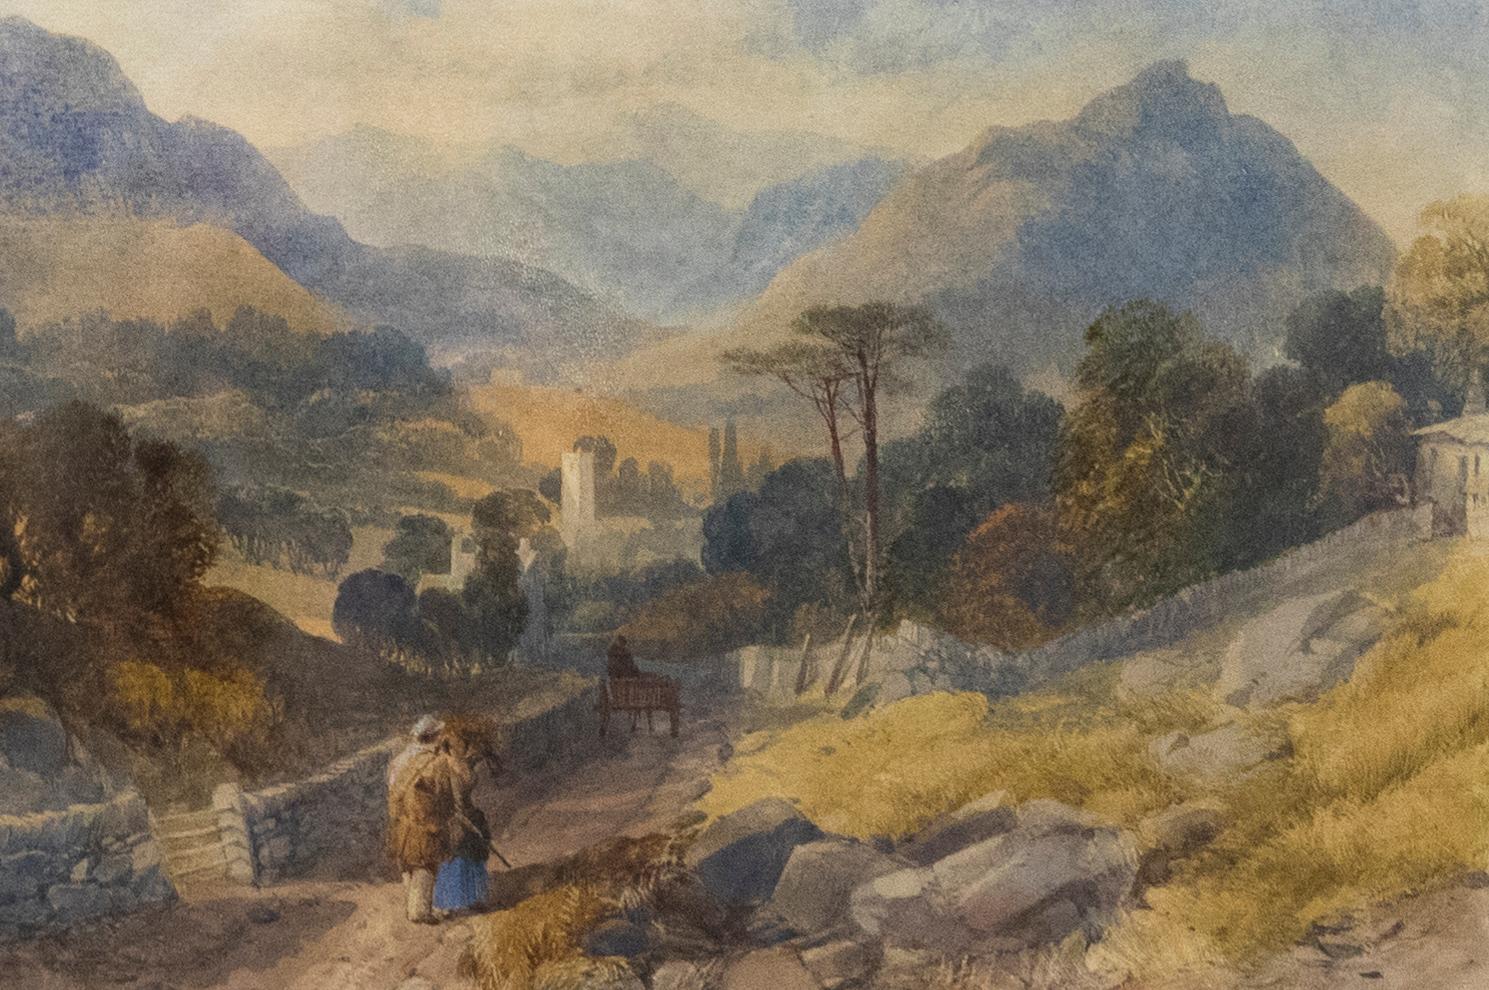 An original mid-19th century watercolour by British artist James Burrell Smith (1822-1897). The painting depicts a breathtaking view of the Lake District from Grasmere's Old Road. A horse and cart can be seen in the foreground, closely followed by a